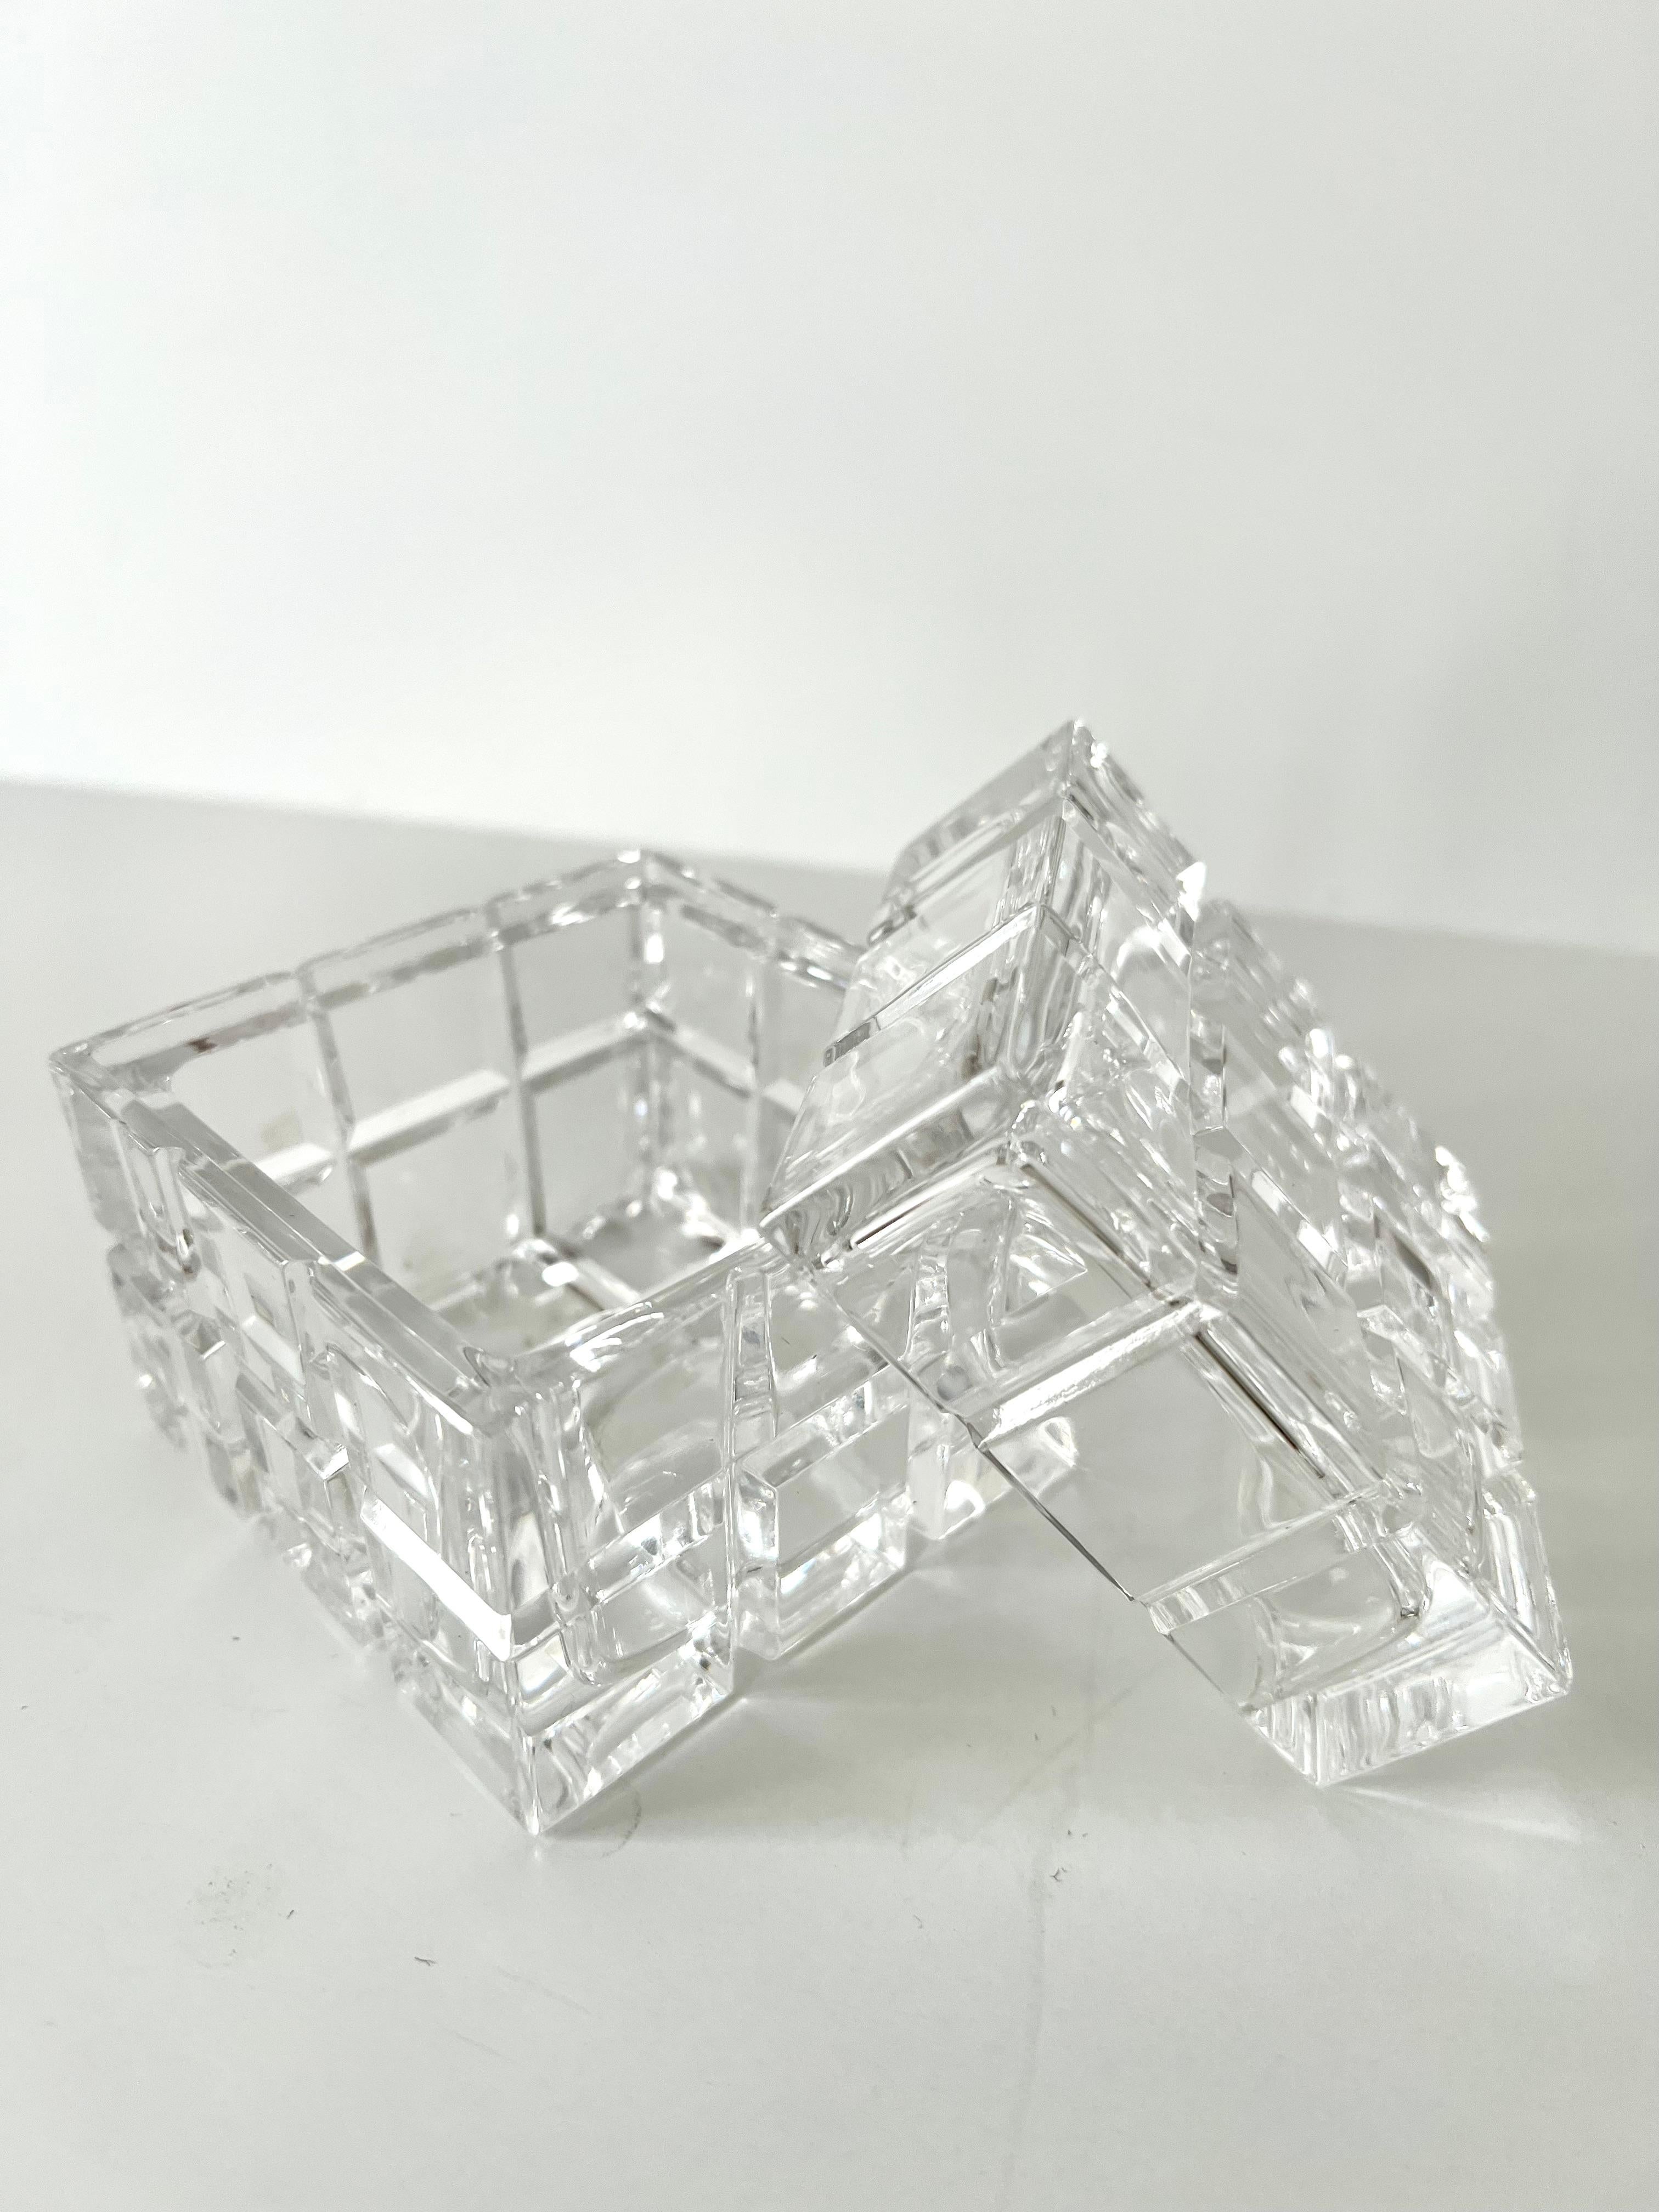 20th Century Cut Crystal Lidded Box in the Style of Tiffany and Company